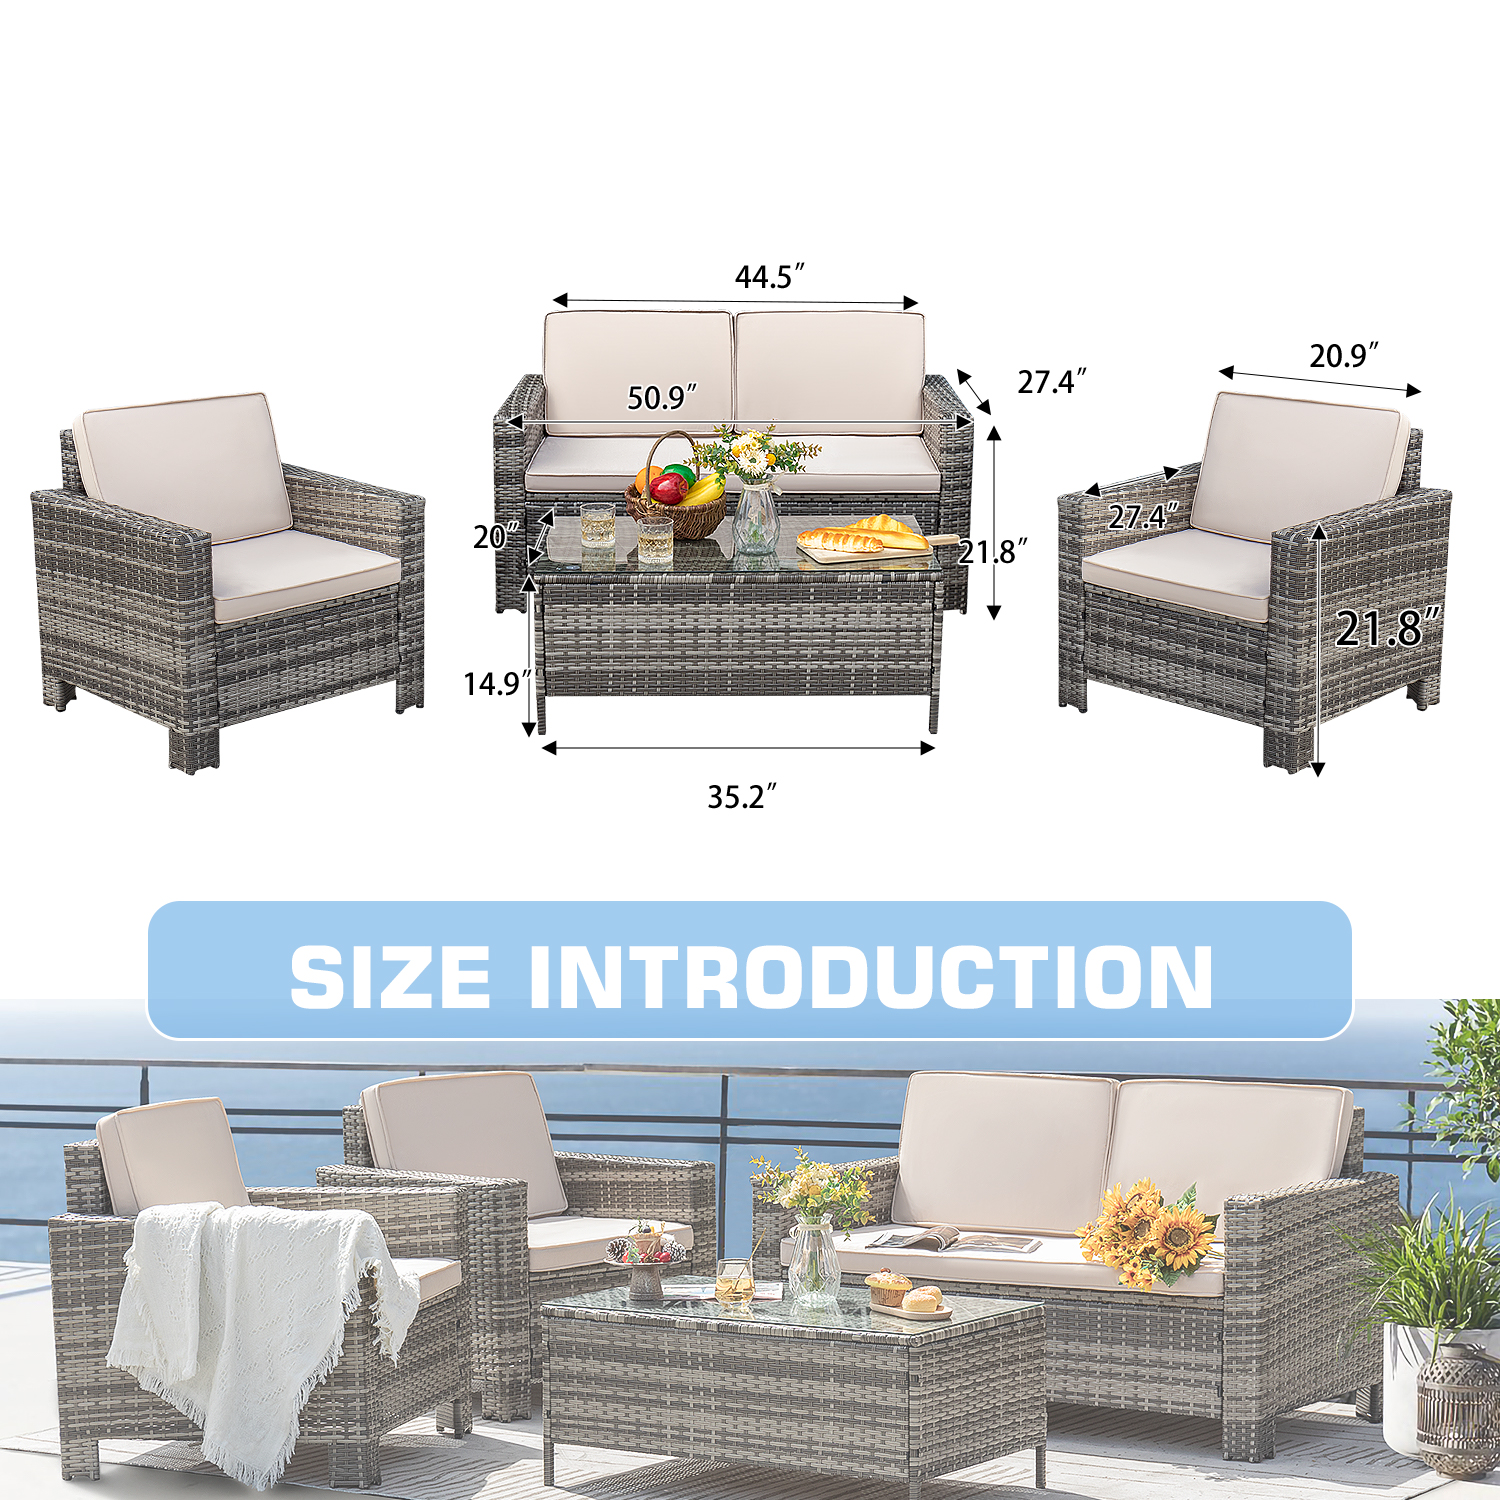 Lacoo 4 Pieces Outdoor Wicker Patio Conversation Set with Cushions, Gray/Beige - image 3 of 6